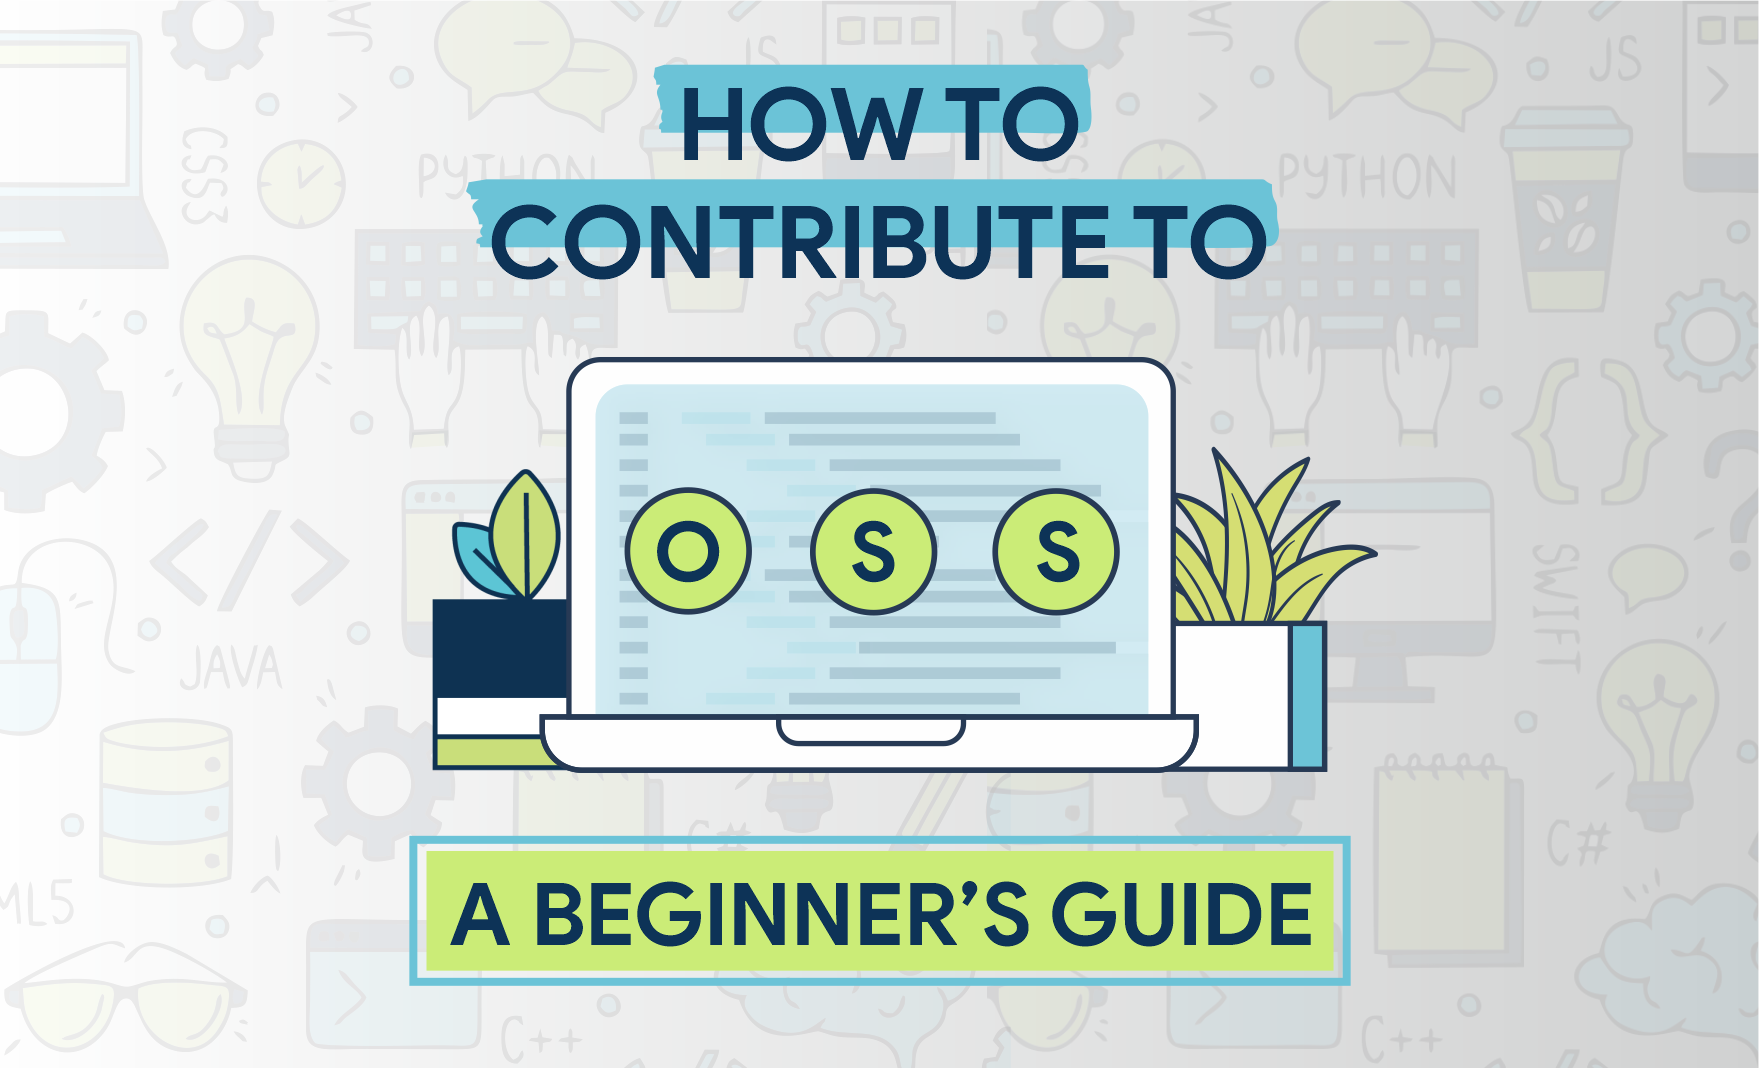 How to contribute to open-source project: A beginner's guide